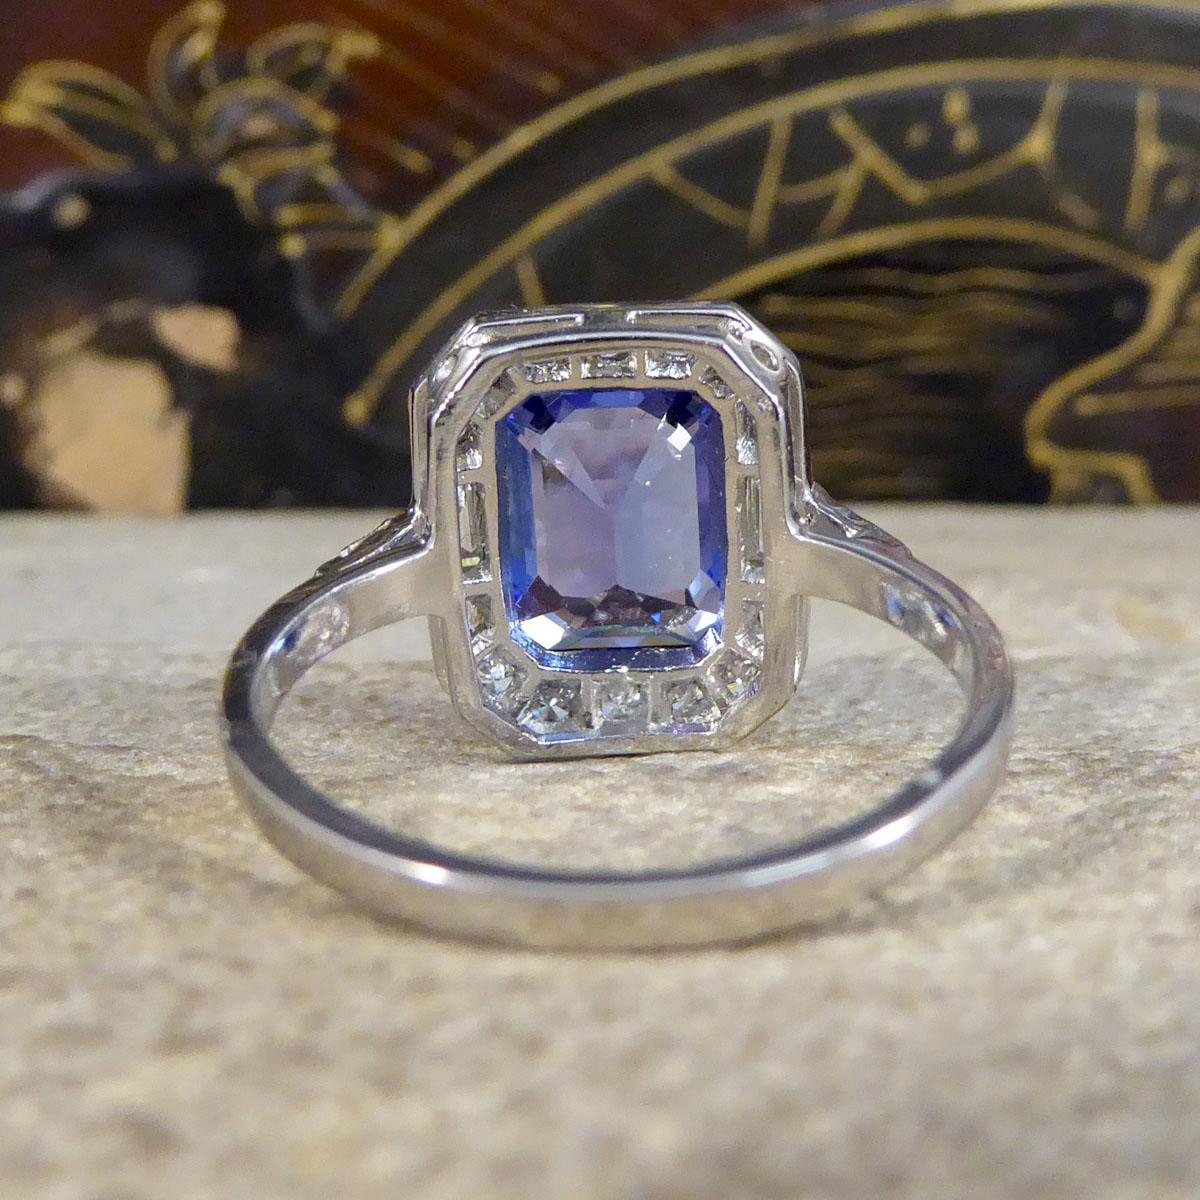 Emerald Cut Contemporary Art Deco Style 2.20ct Tanzanite and Diamond Cluster Ring in Plat